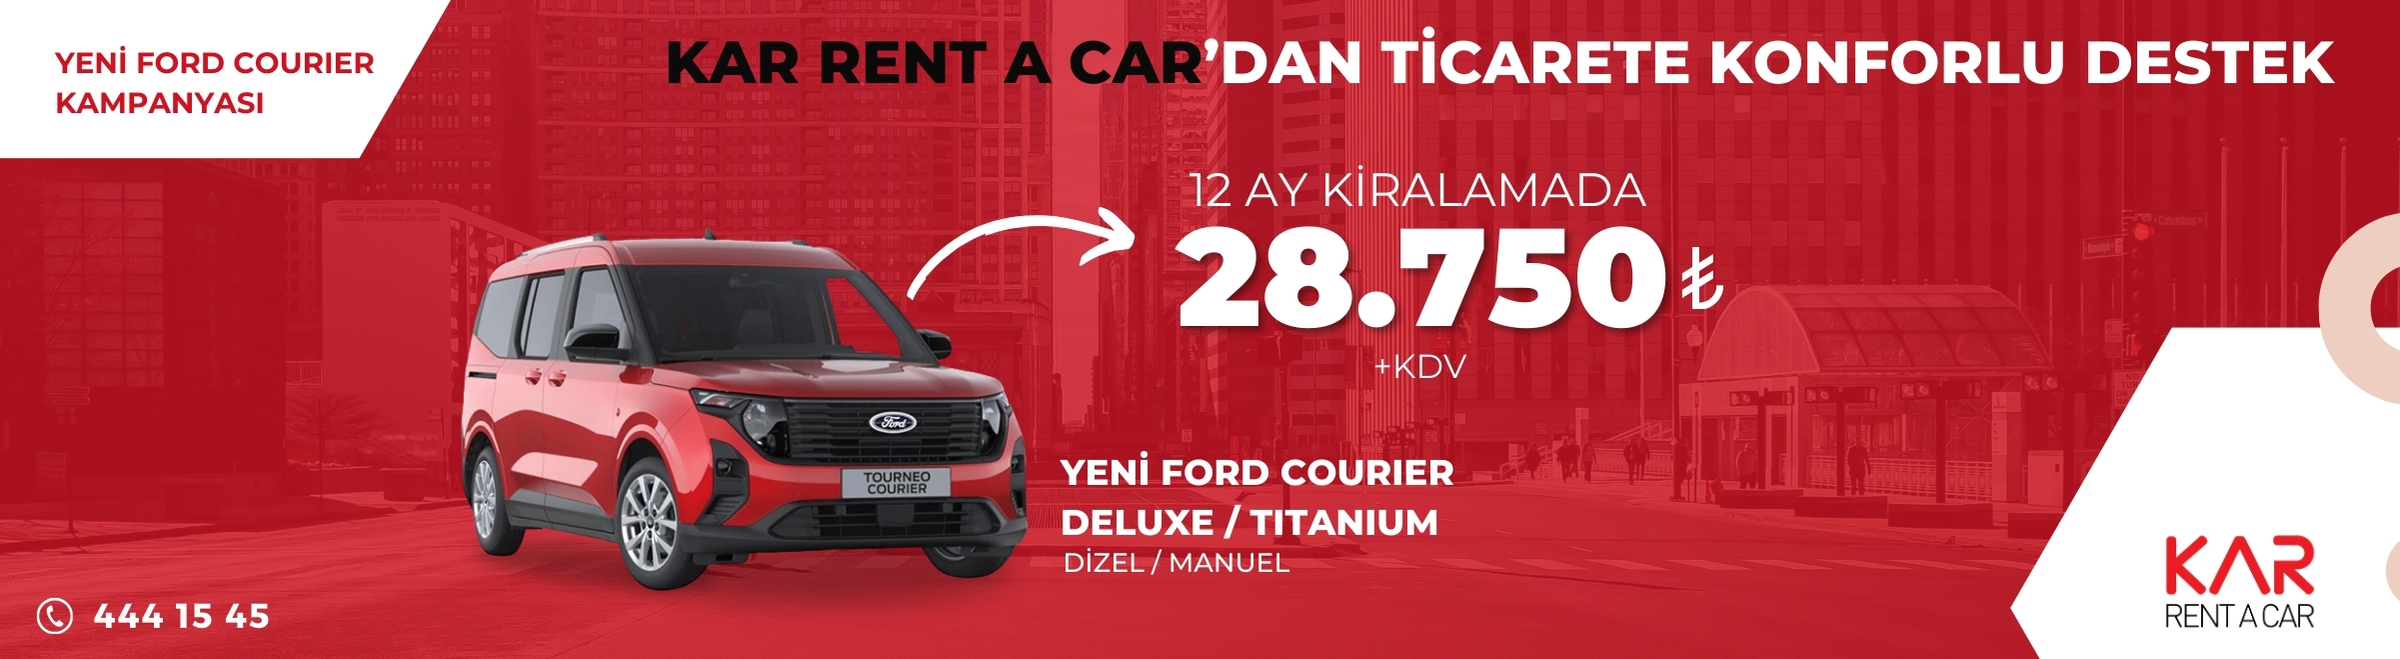 New Ford Courier Campaigns